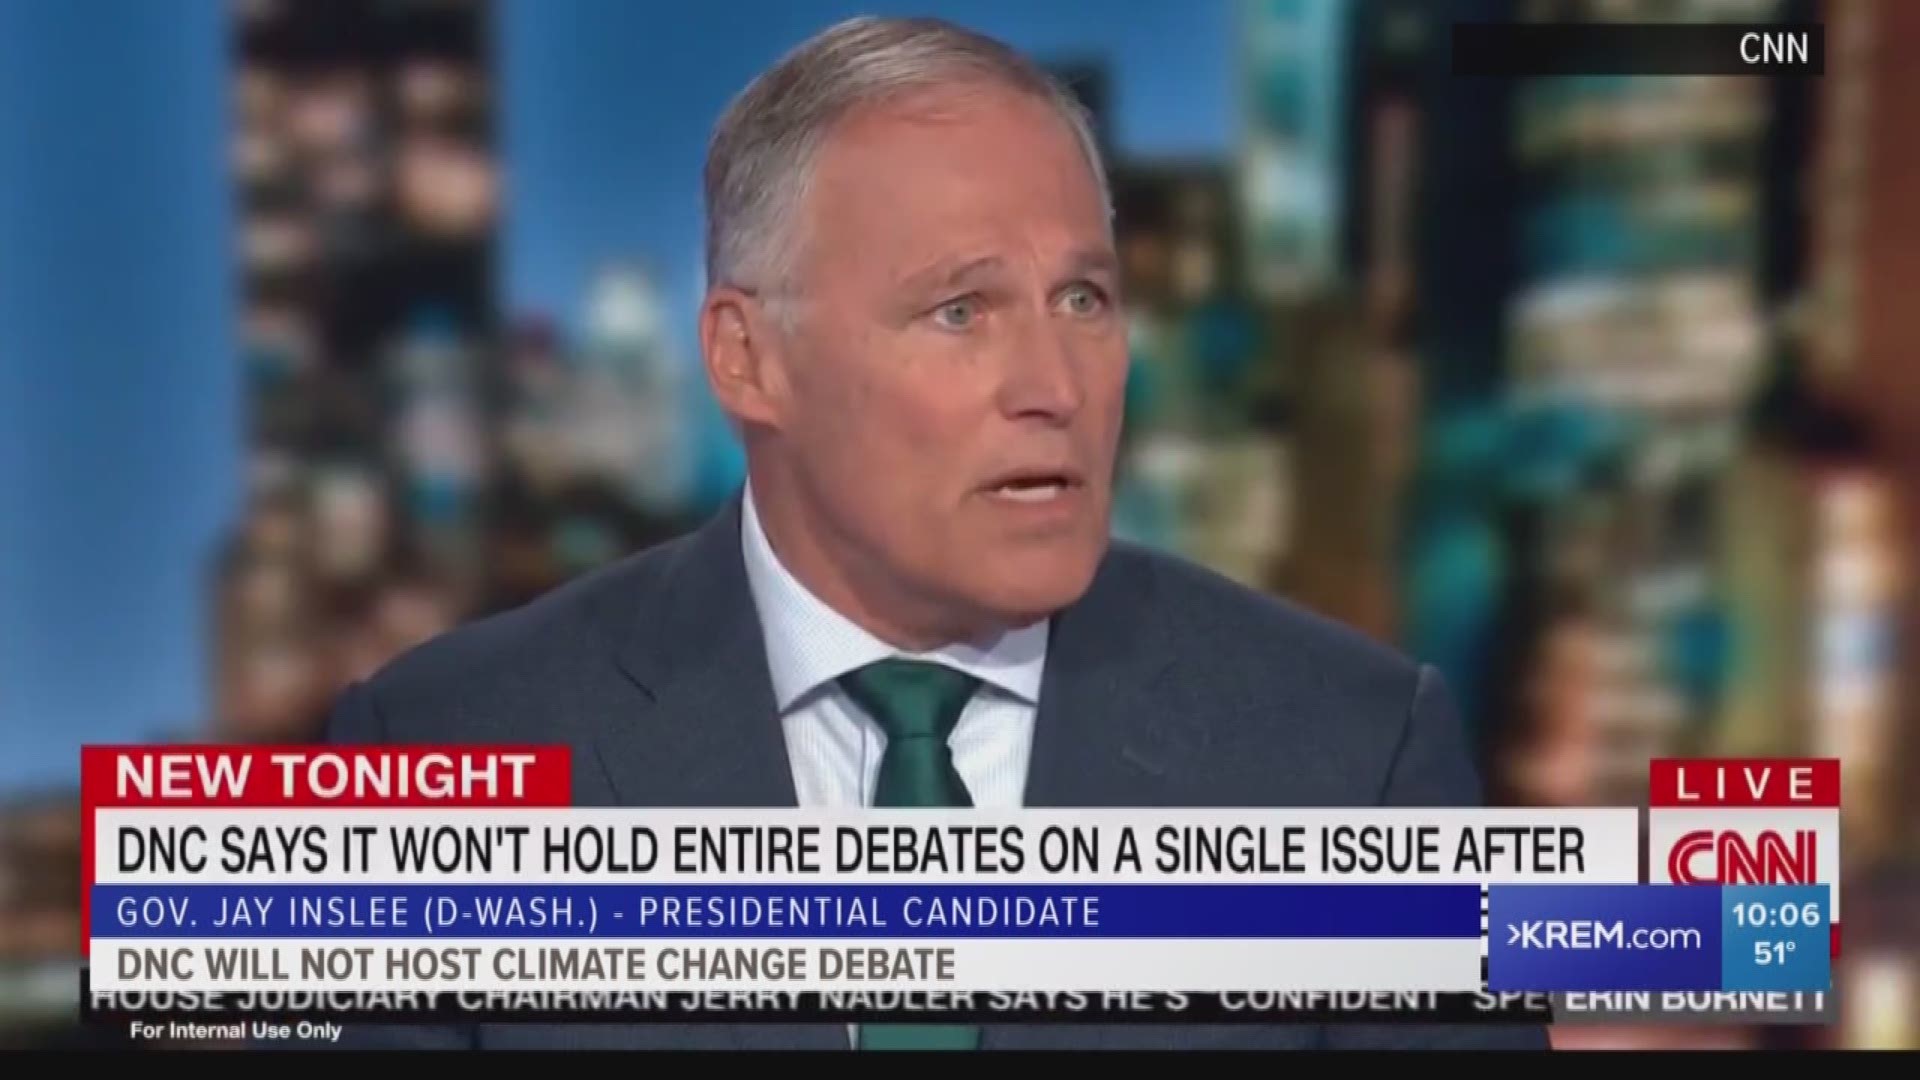 Inslee also said the DNC would bar him from future debates if he took part in a climate change debate held by any outside organization.